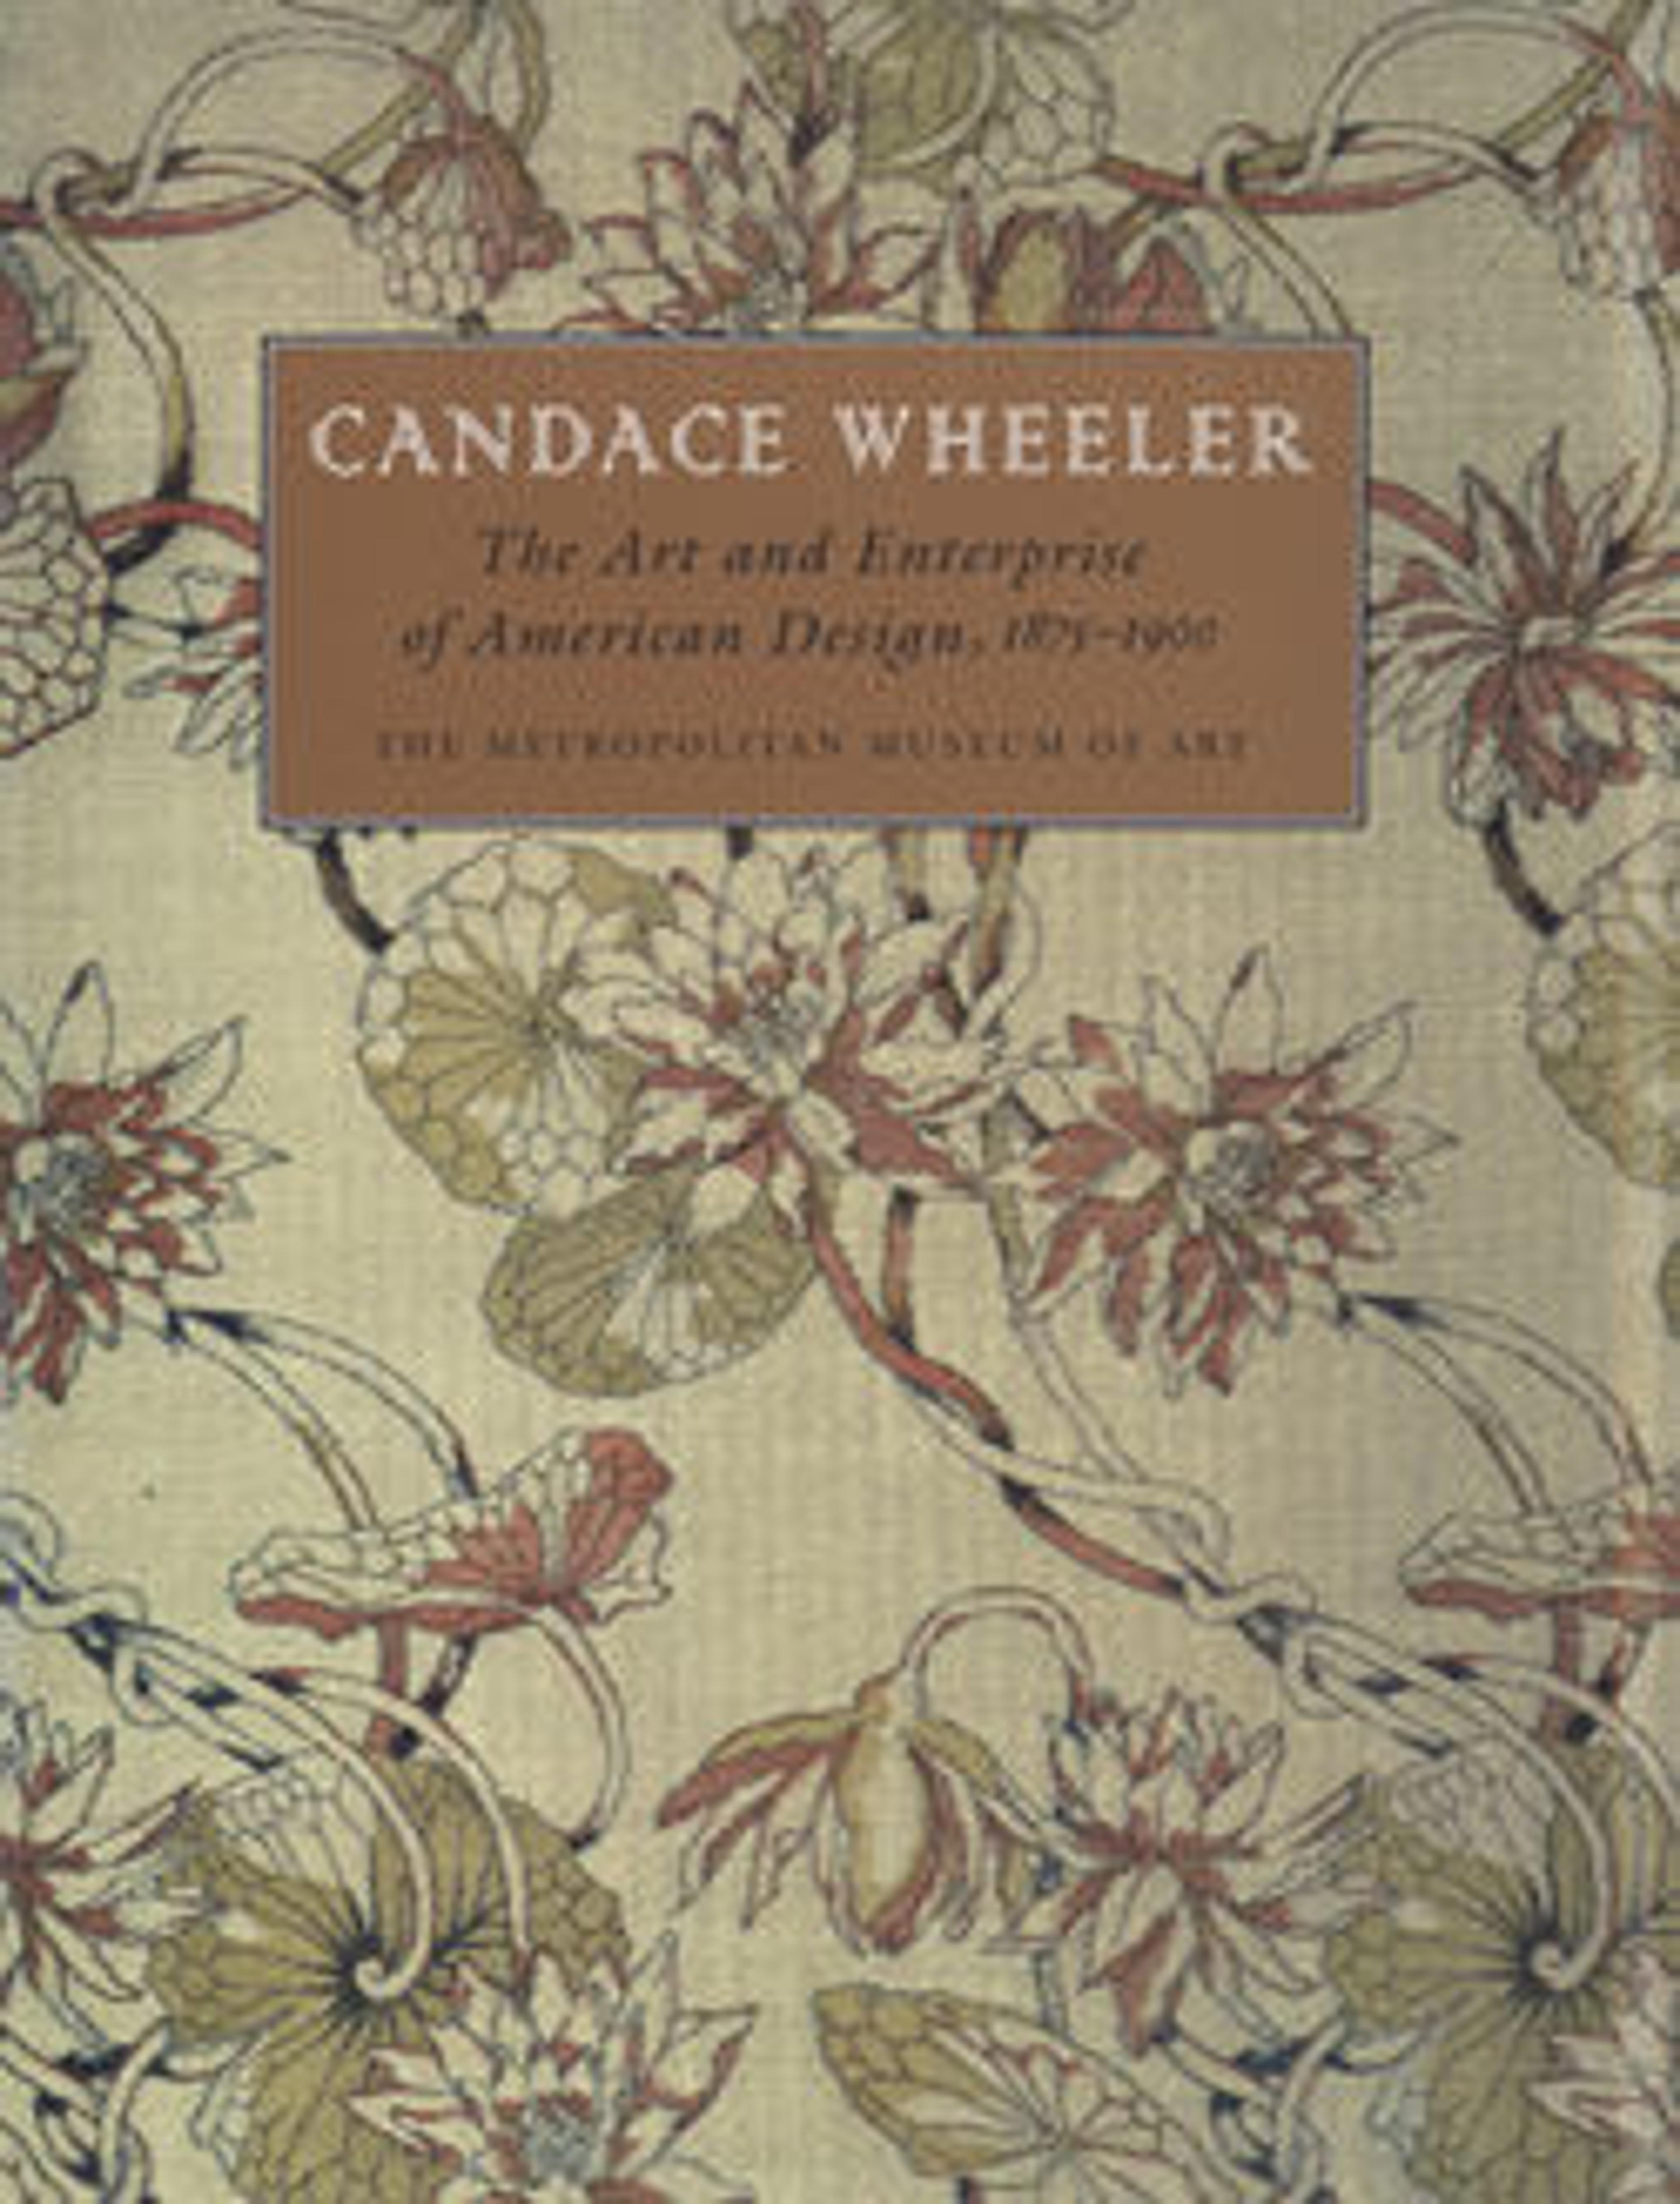 Candace Wheeler: The Art and Enterprise of American Design, 1875-1900